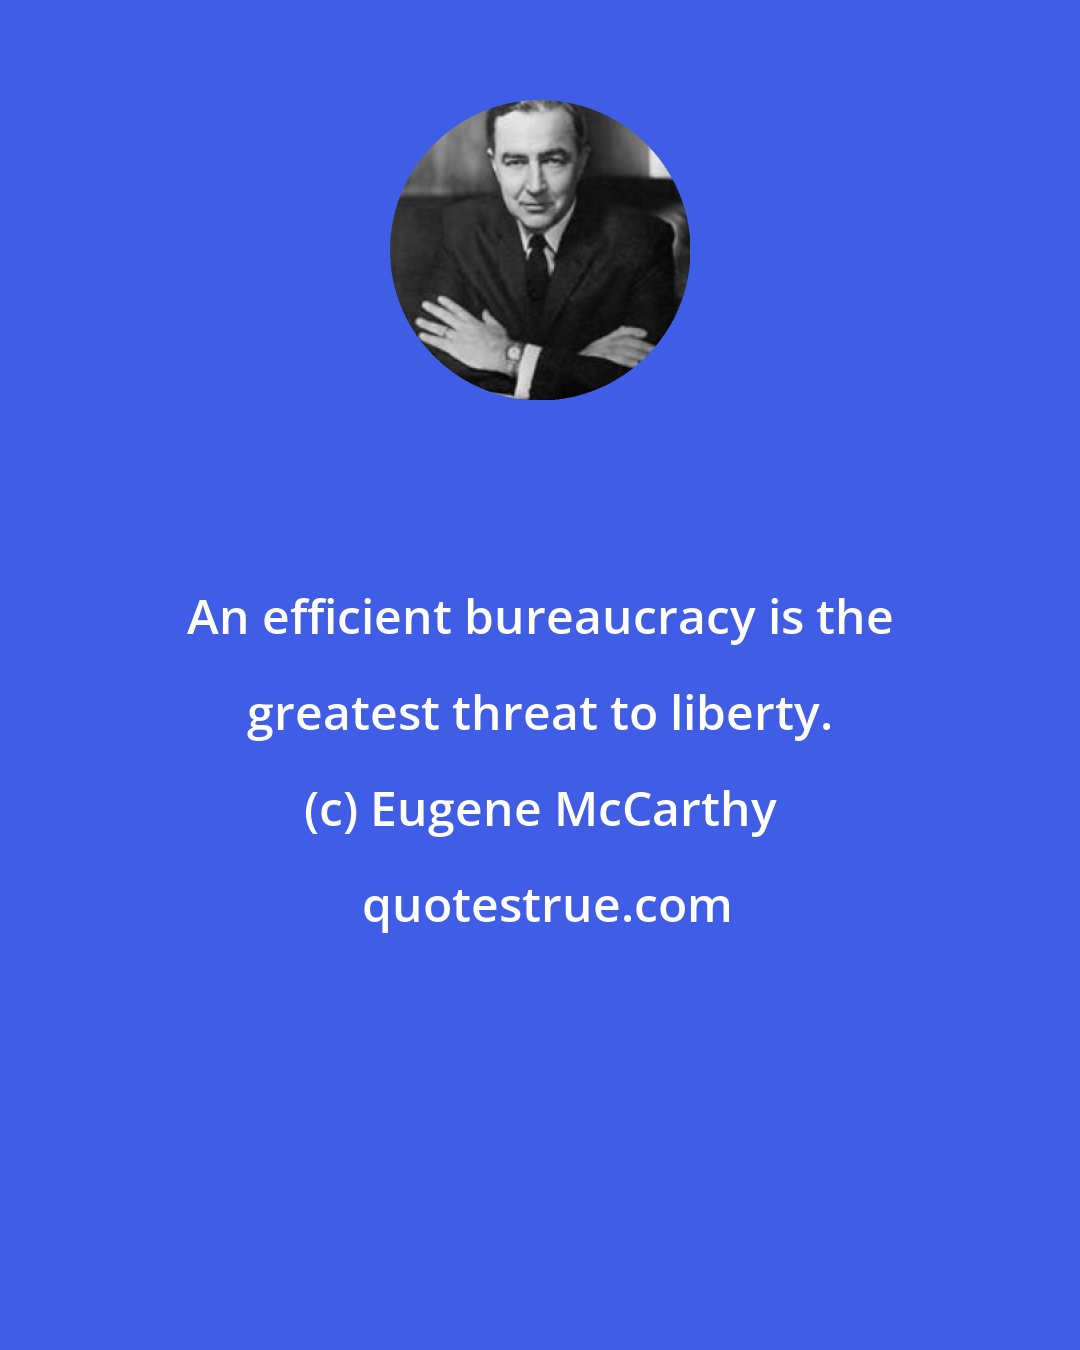 Eugene McCarthy: An efficient bureaucracy is the greatest threat to liberty.